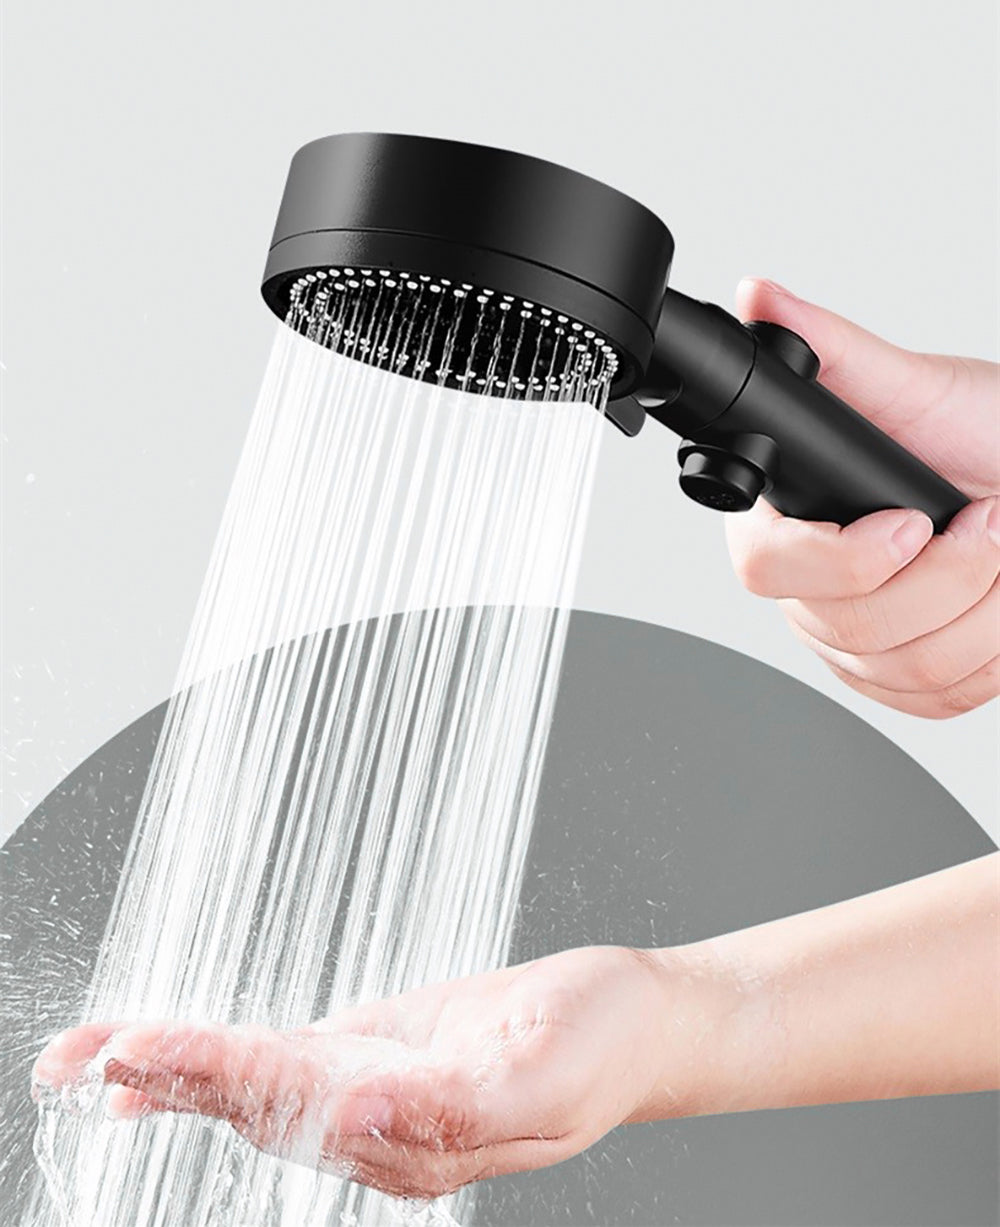 Shower head with 6-mode massage jets